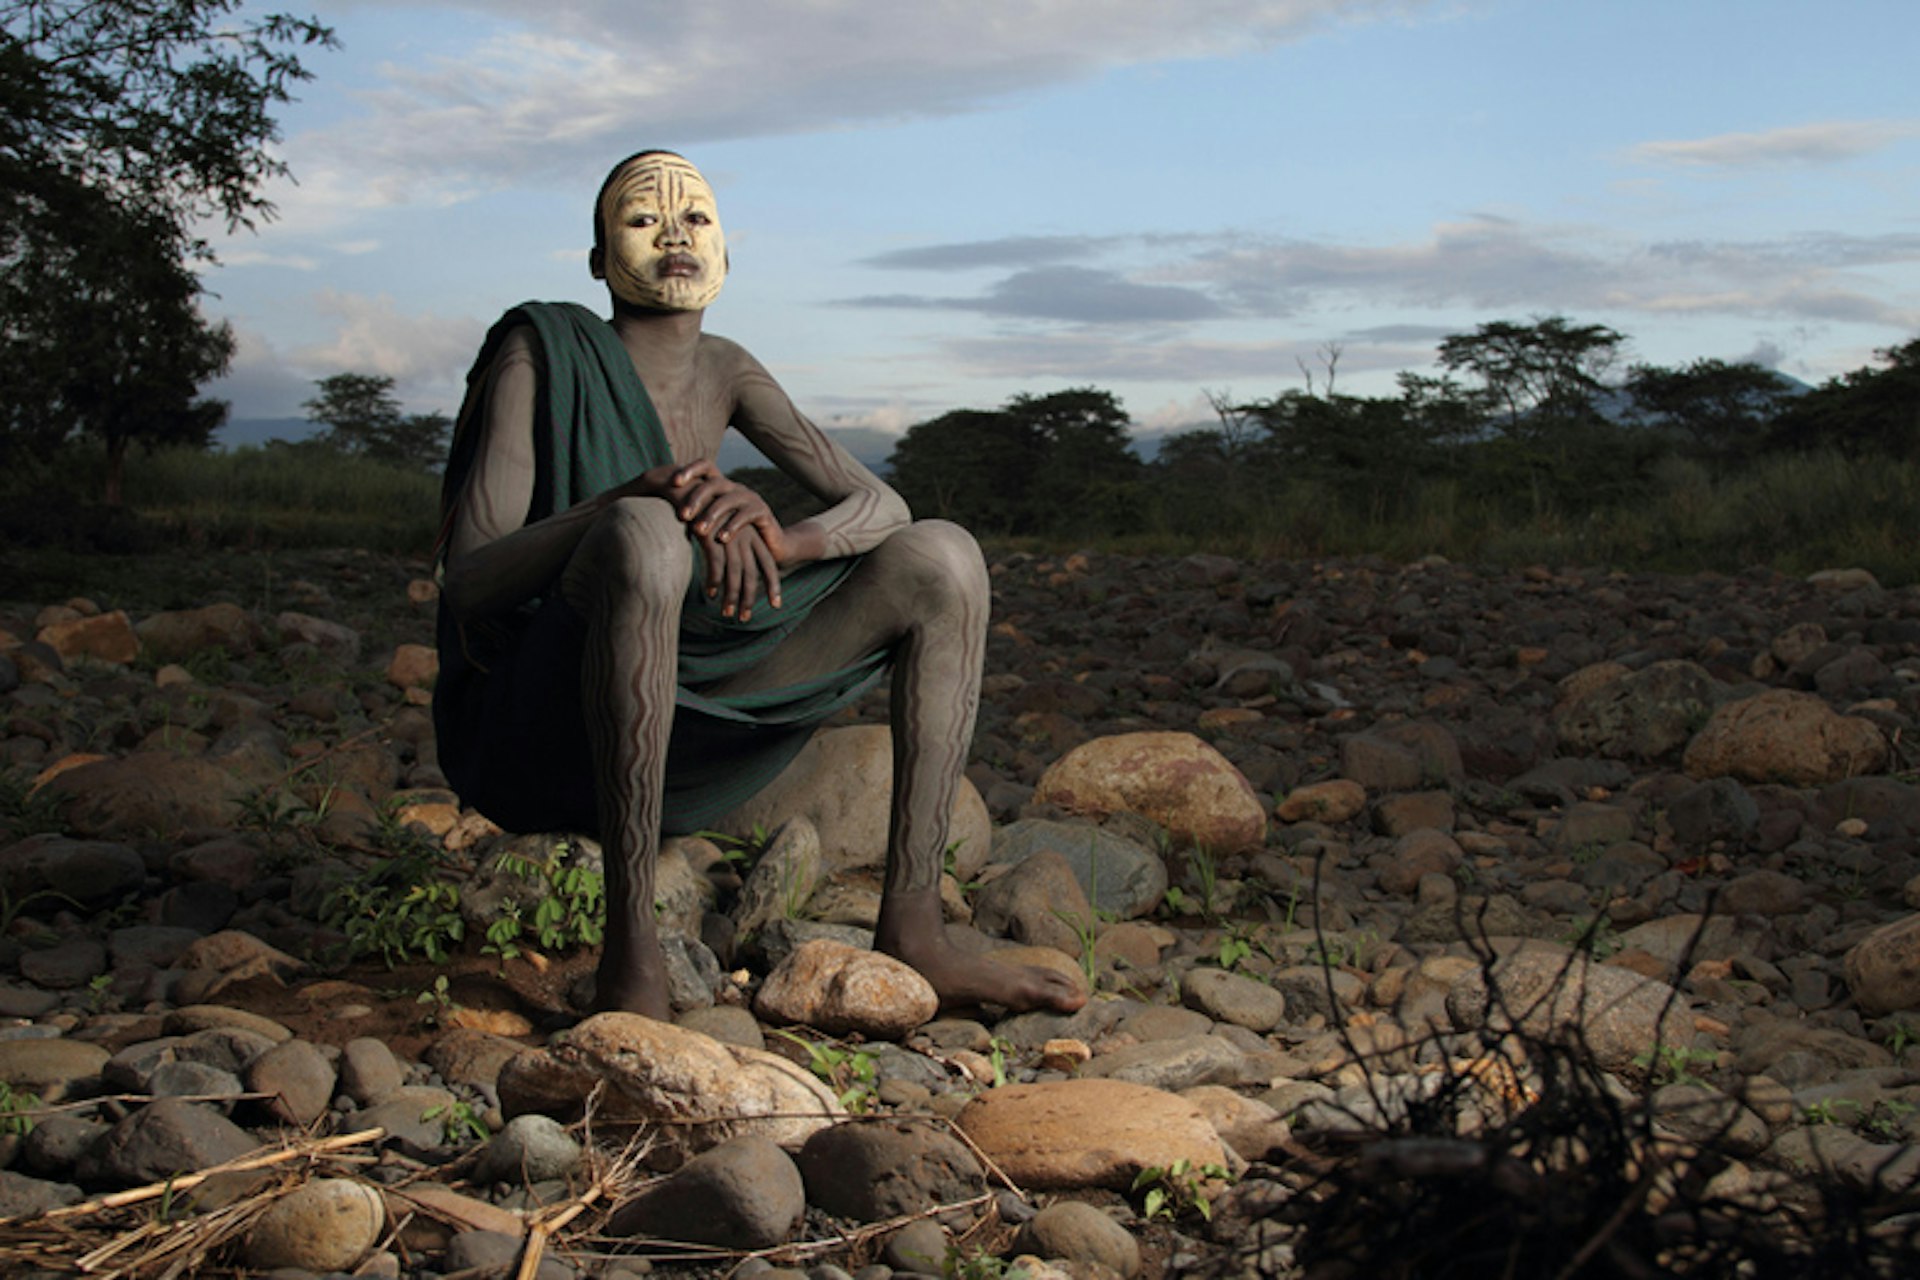 A Surmi man on the western side of the Omo valley. Many of the numerous tribes in this region continue to live a largely traditional lifestyle. Image by Stuart Butler / Lonely Planet.